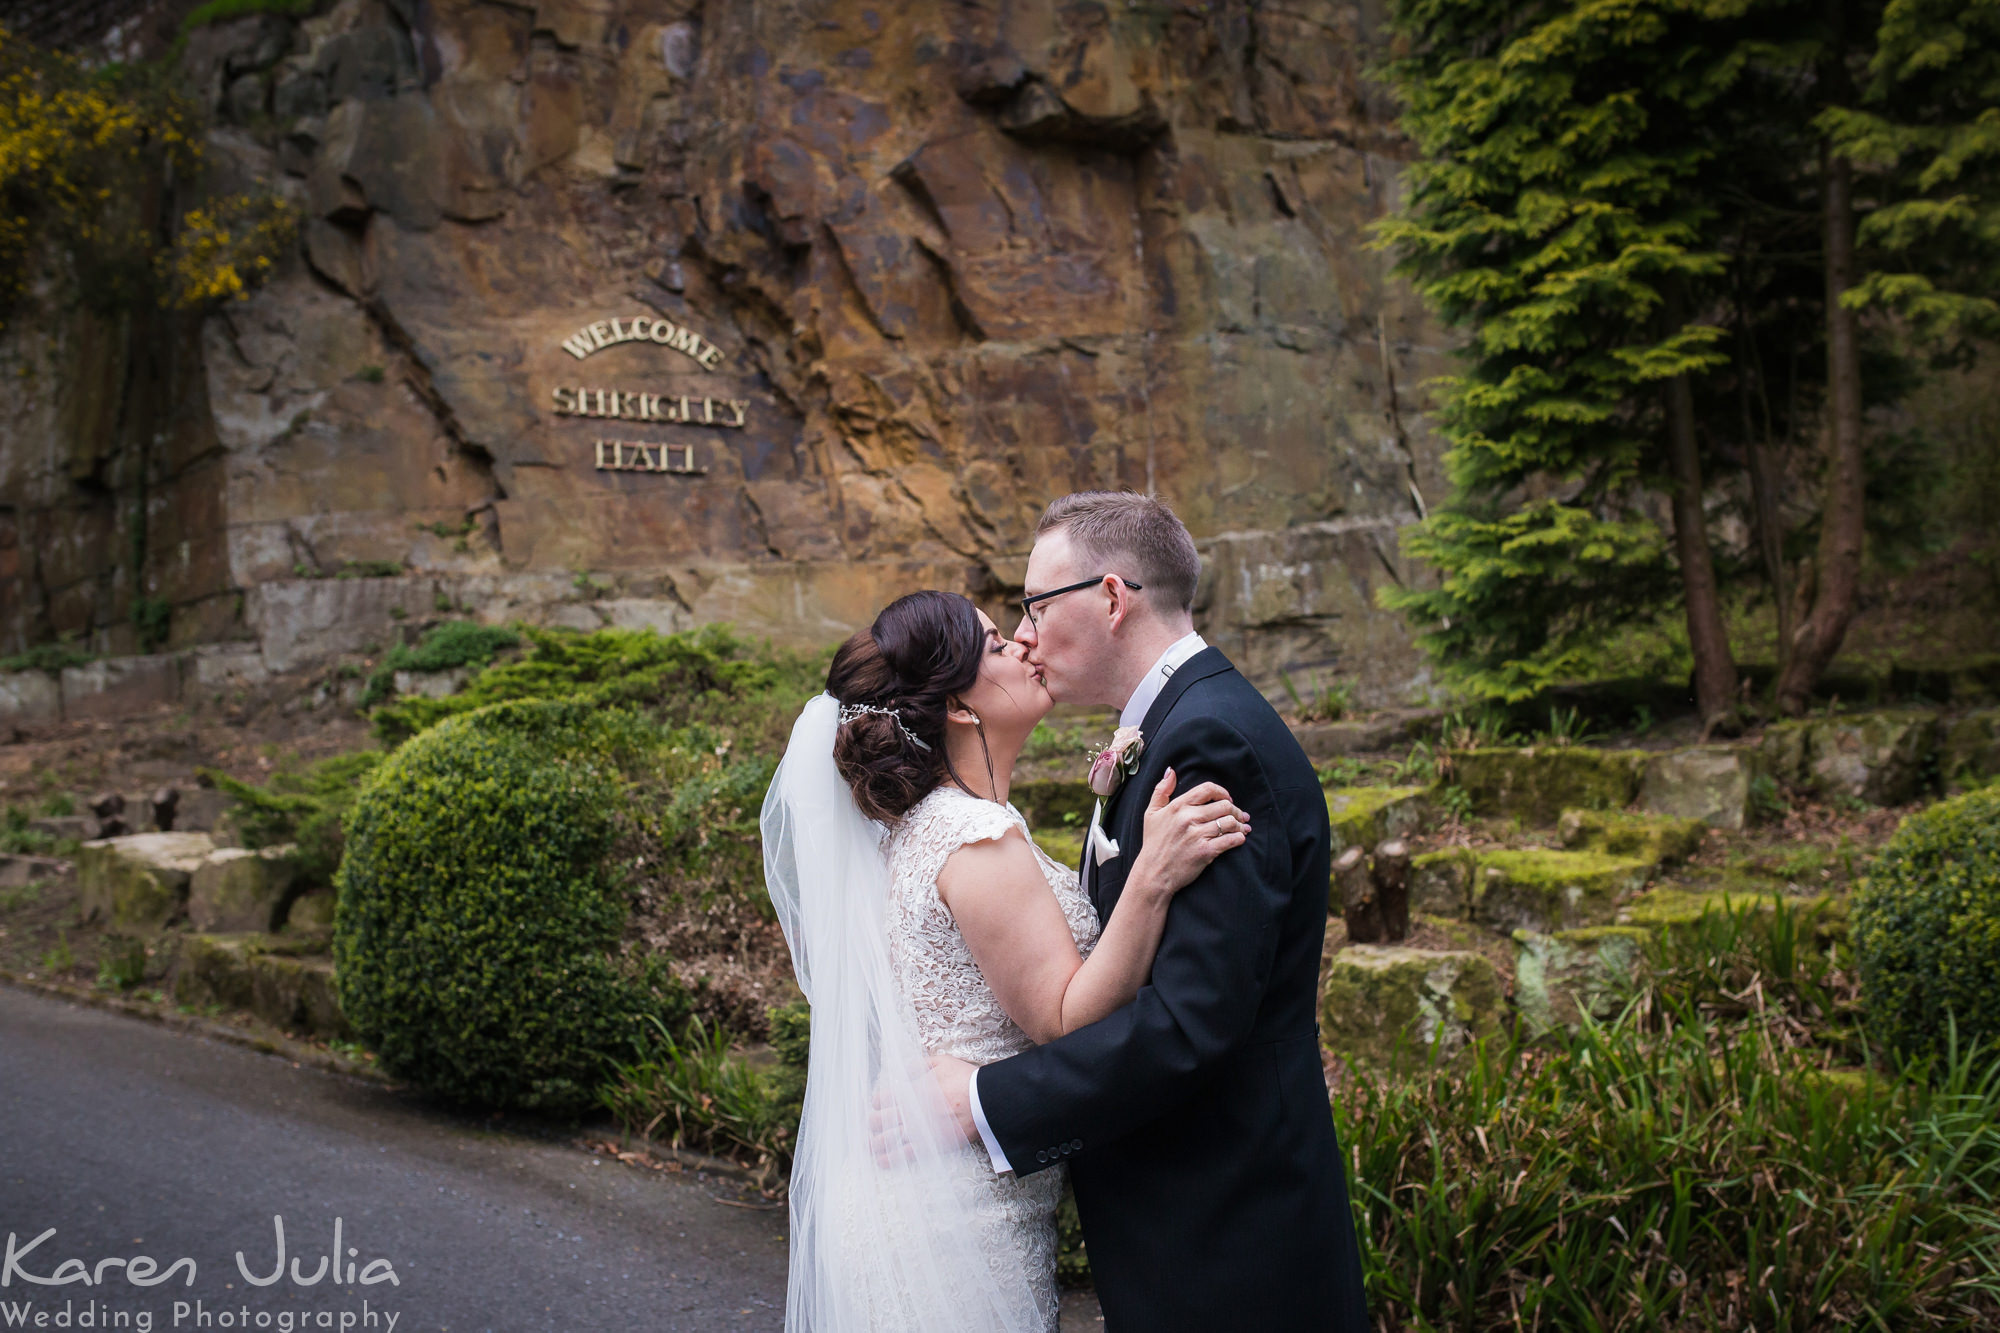 bride and groom portrait next to the Shrigley Hall welcome sign